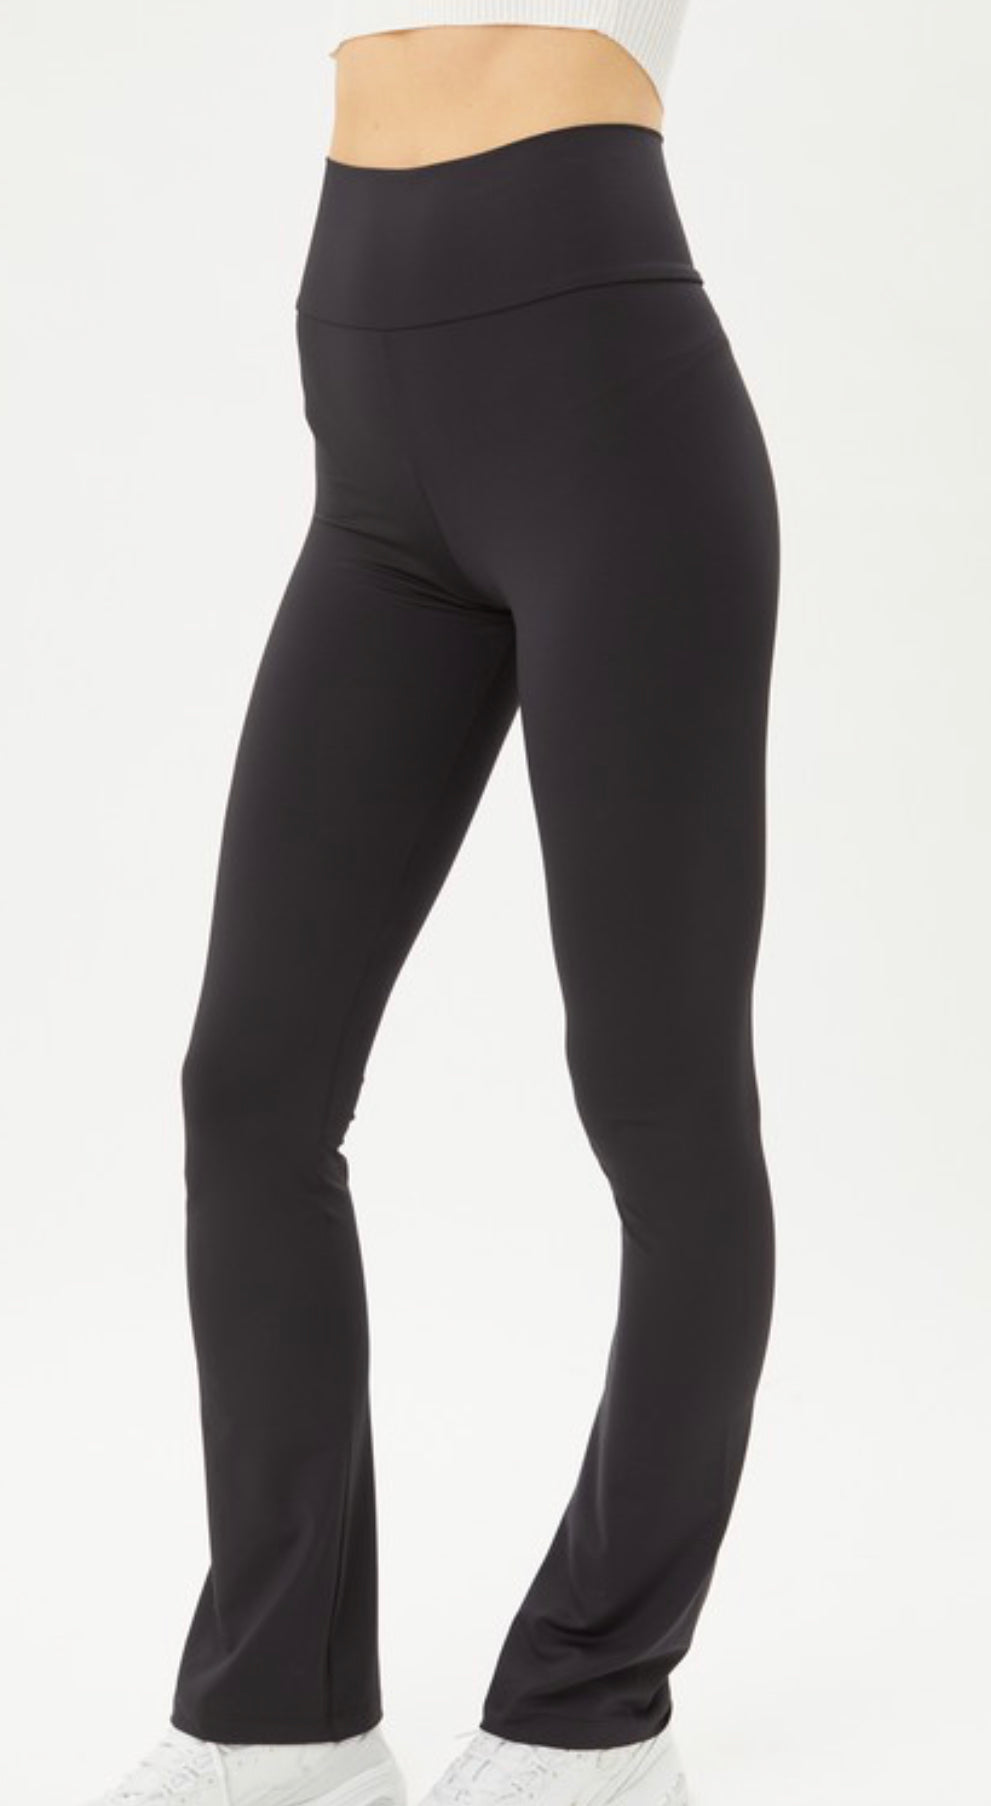 Our High Waisted Flare Leggings